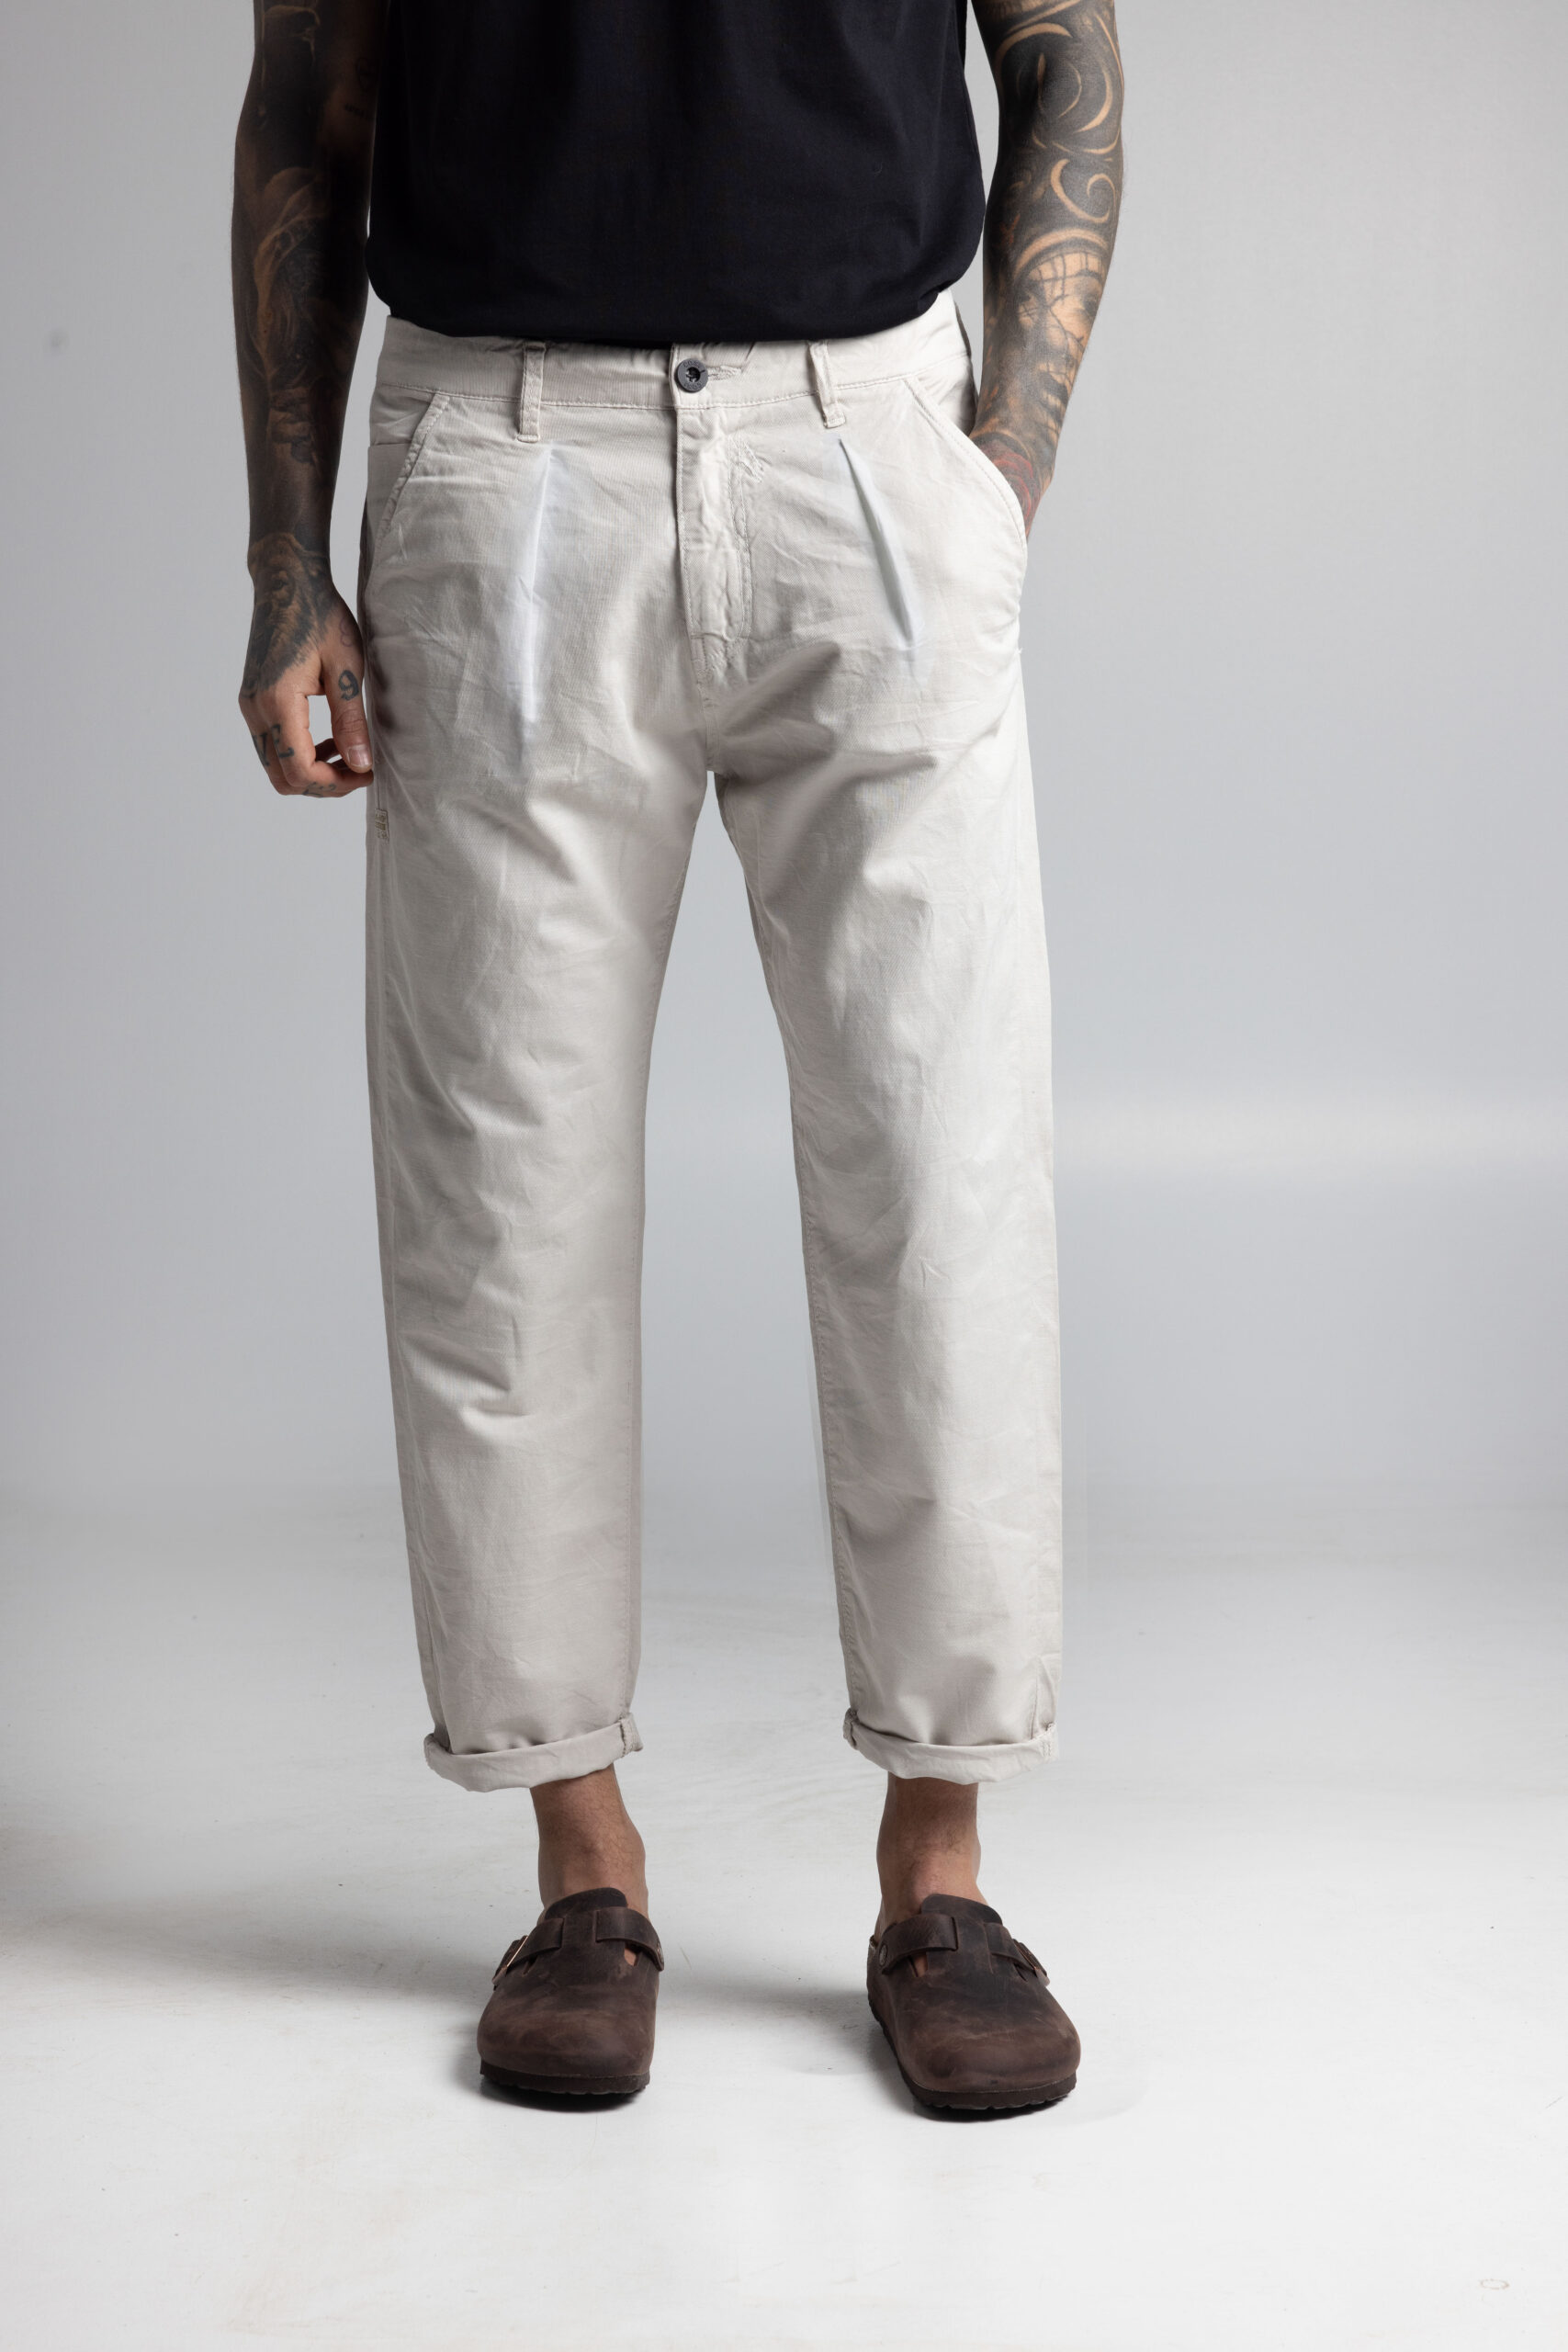 63-rosetti 50 stone cosi jeans summer trousers collection